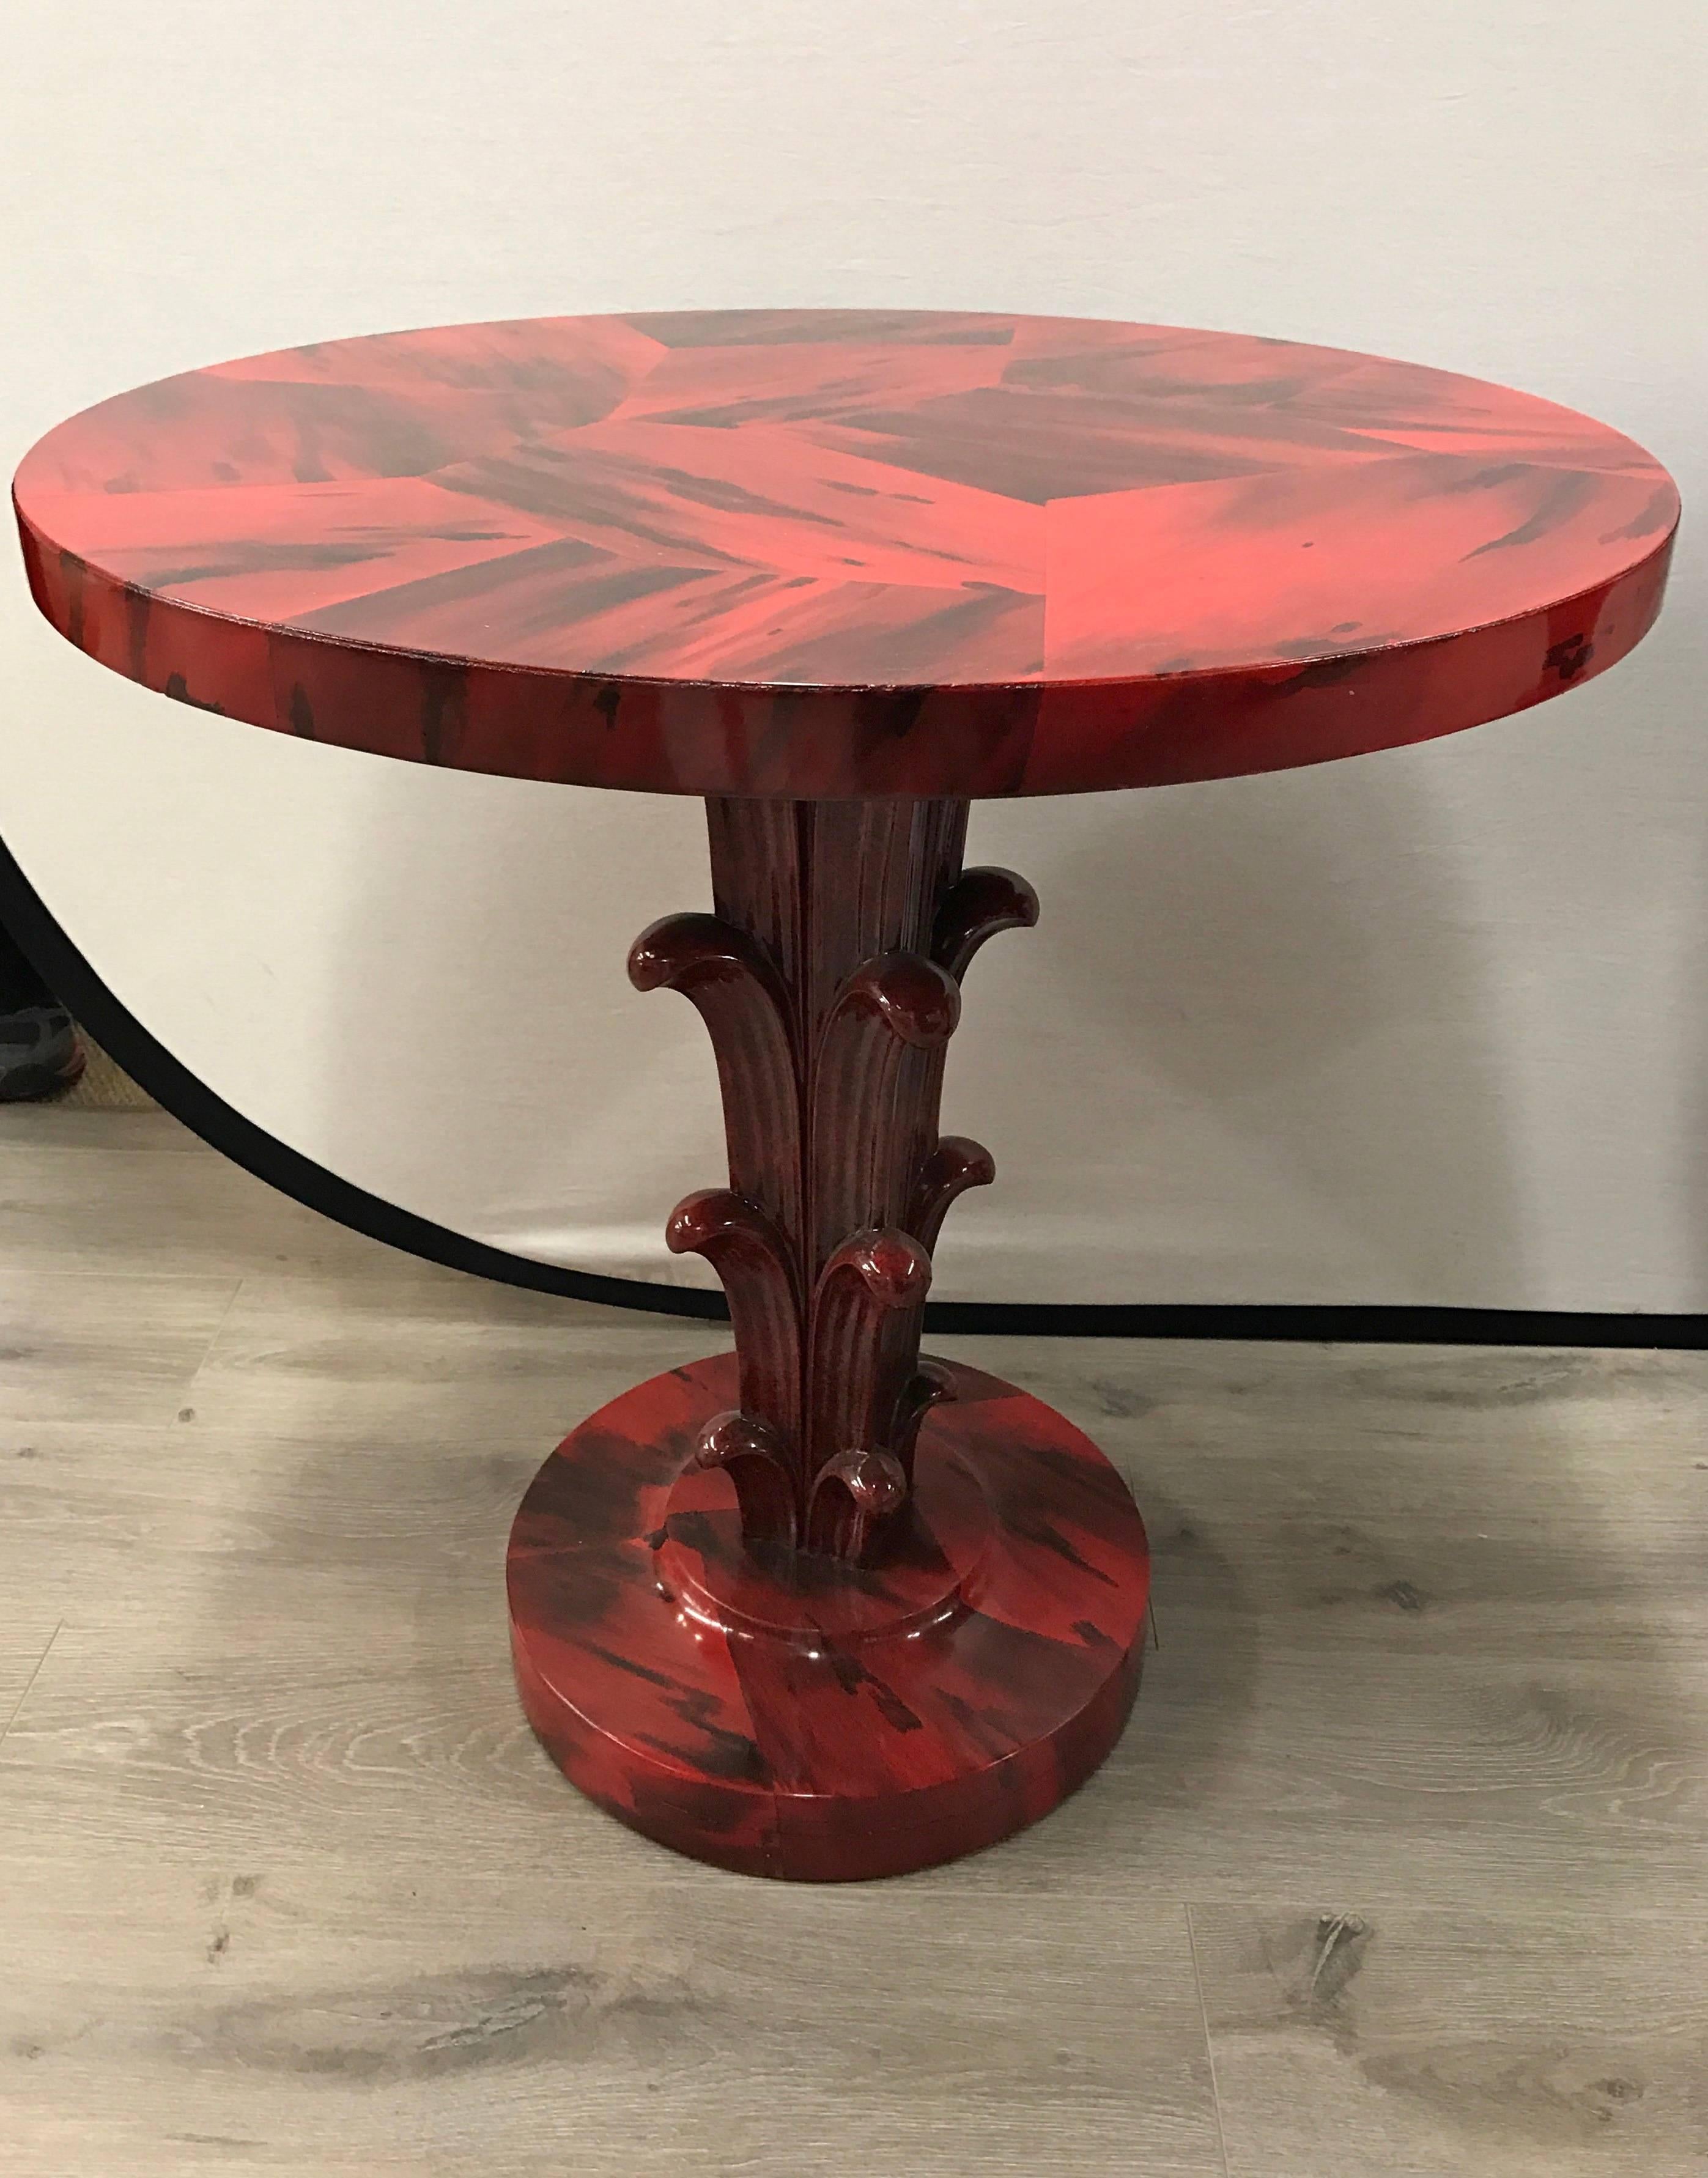 Serge Roche Style Art Deco Red Laquer Palm Tree Tables 2